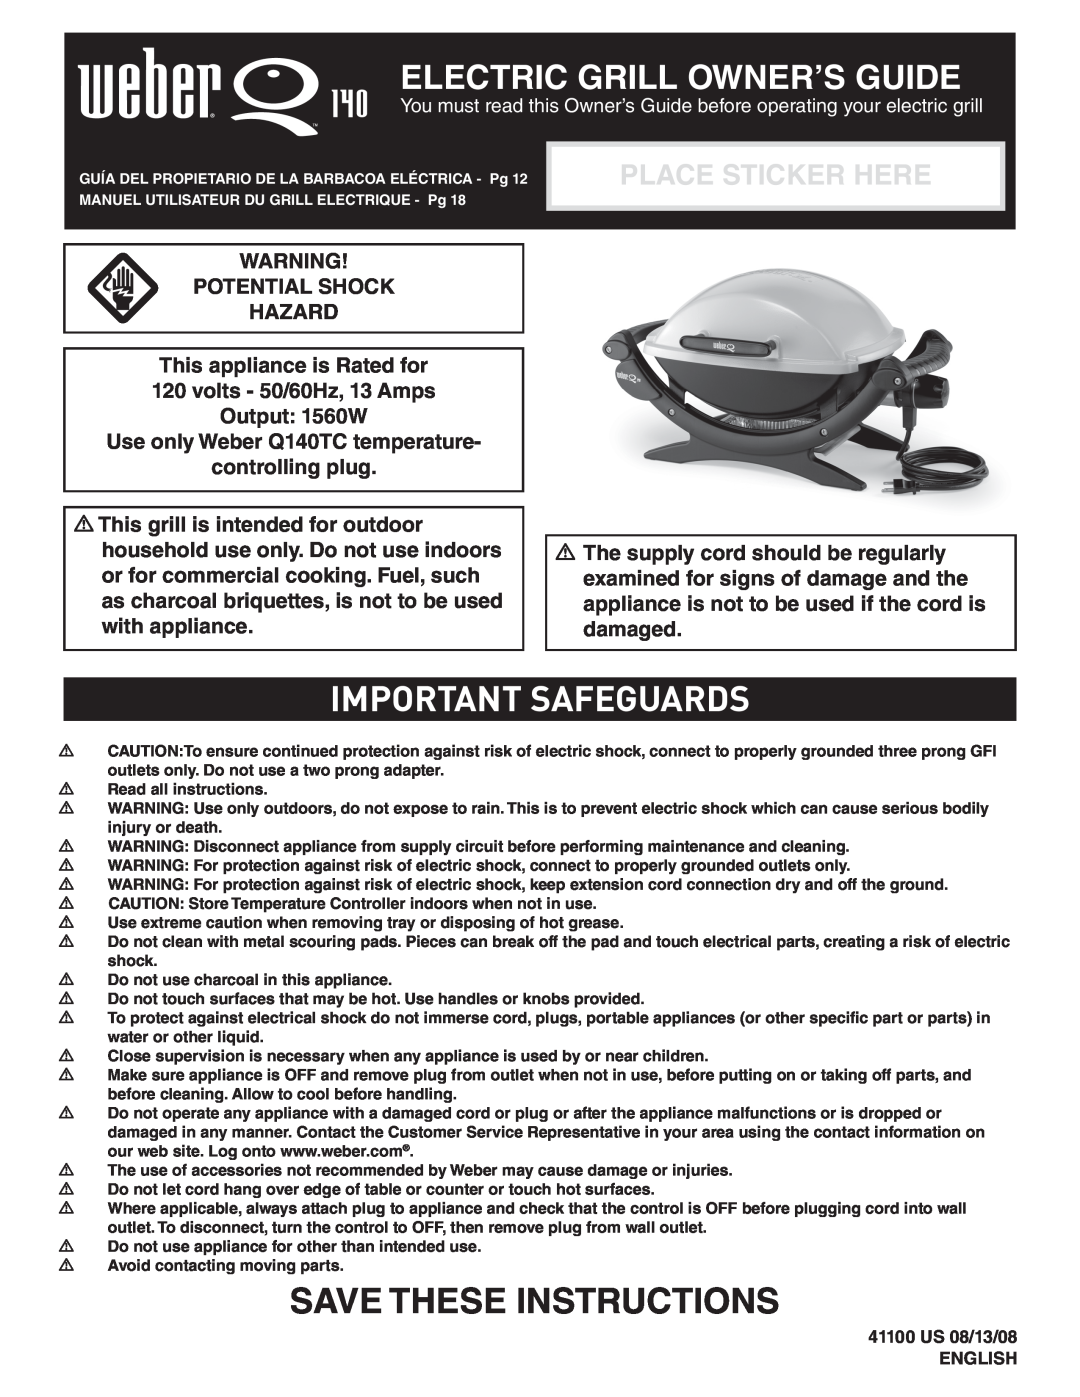 Weber Q 140 manual Important Safeguards, Save These Instructions, Place Sticker Here, Electric Grill Owner’S Guide 